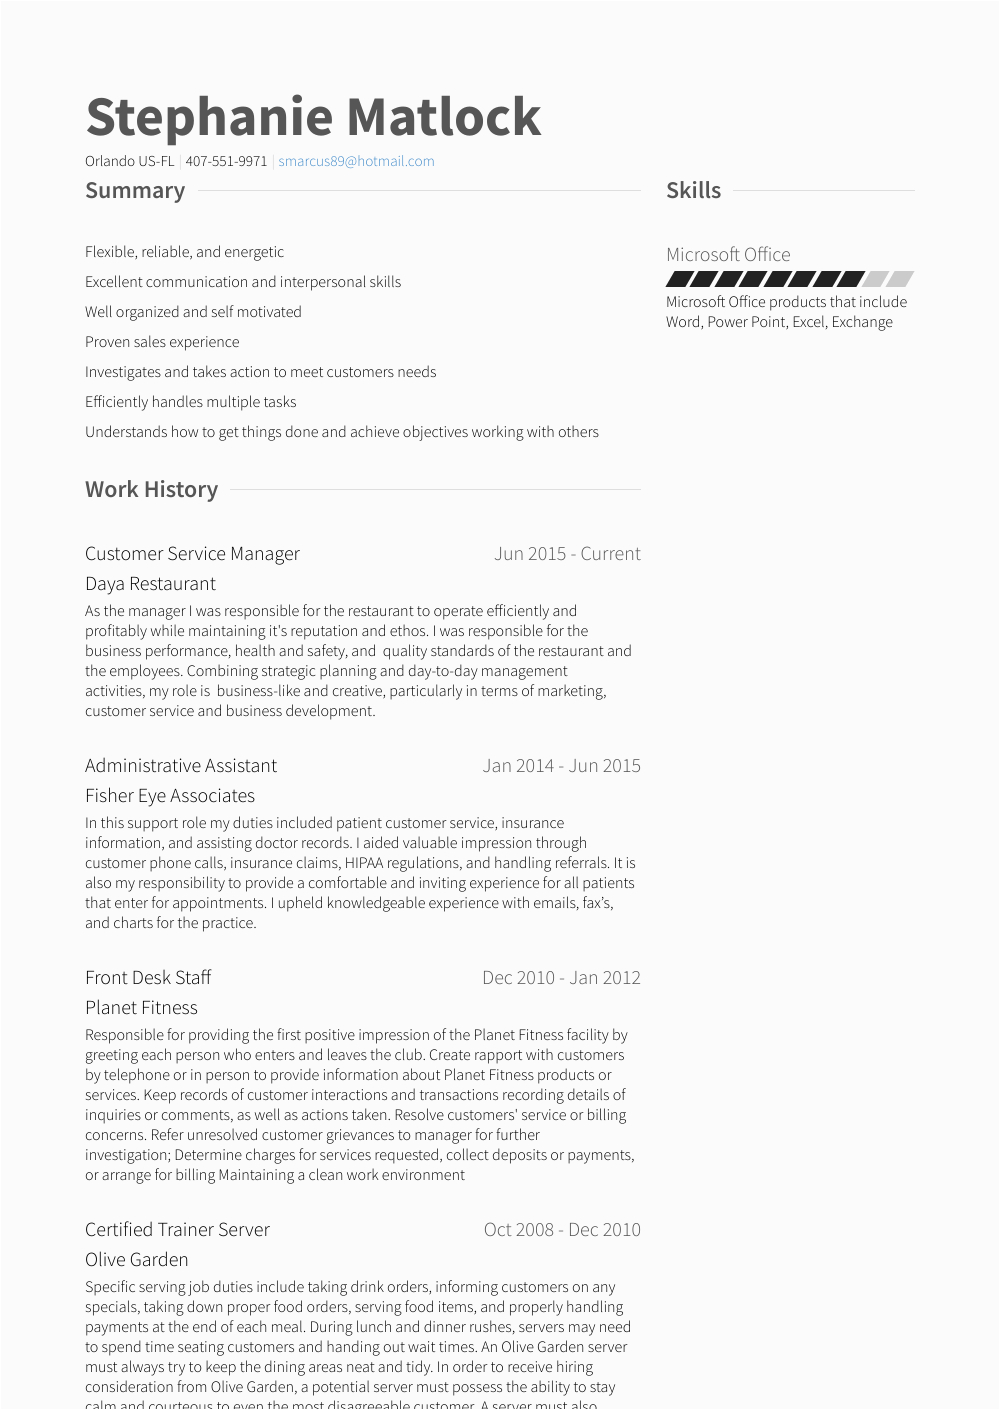 sample resume for stay at home mom